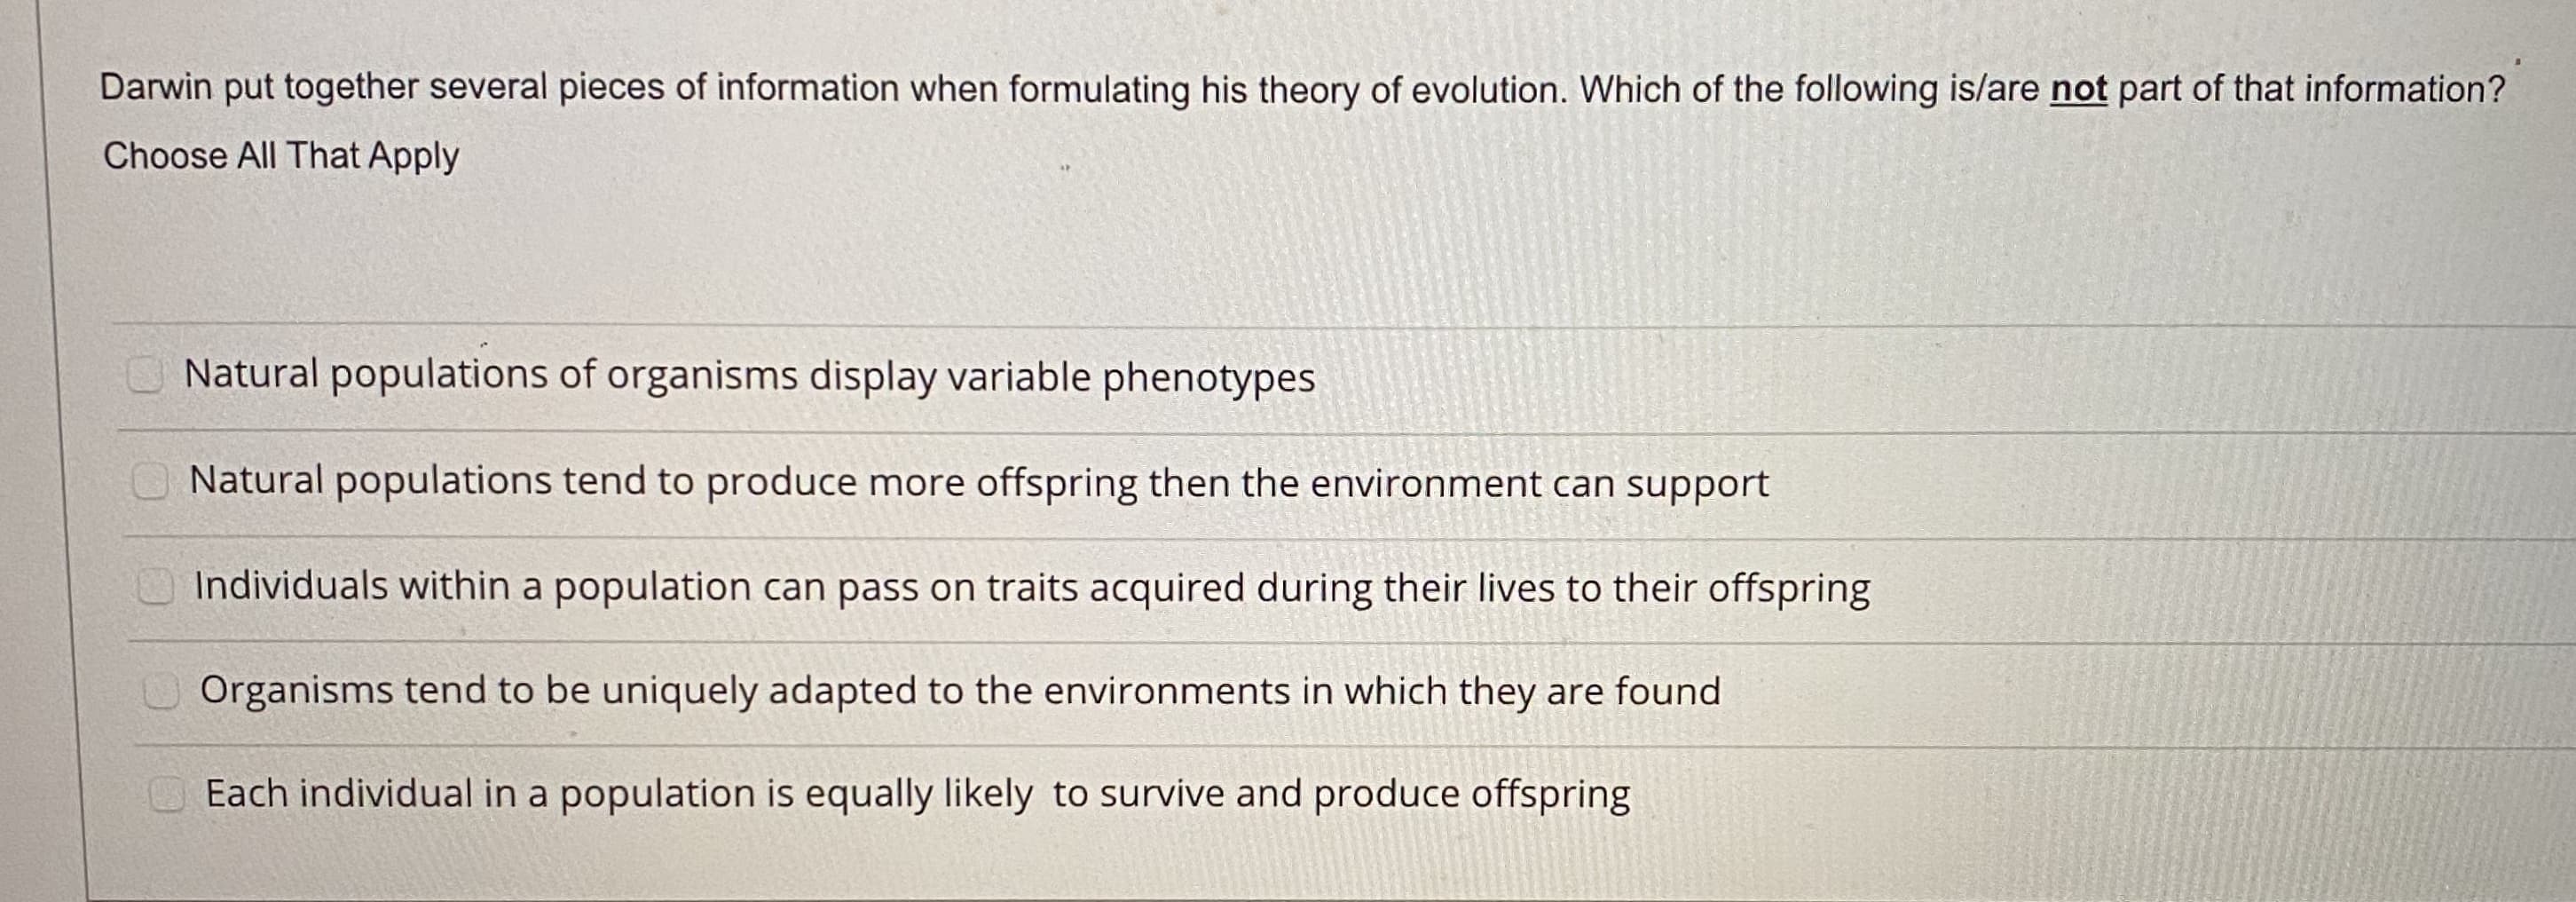 Darwin put together several pieces of information when formulating his theory of evolution. Which of the following is/are not part of that information?
Choose All That Apply
Natural populations of organisms display variable phenotypes
Natural populations tend to produce more offspring then the environment can support
Individuals within a population can pass on traits acquired during their lives to their offspring
Organisms tend to be uniquely adapted to the environments in which they are found
Each individual in a population is equally likely to survive and produce offspring
